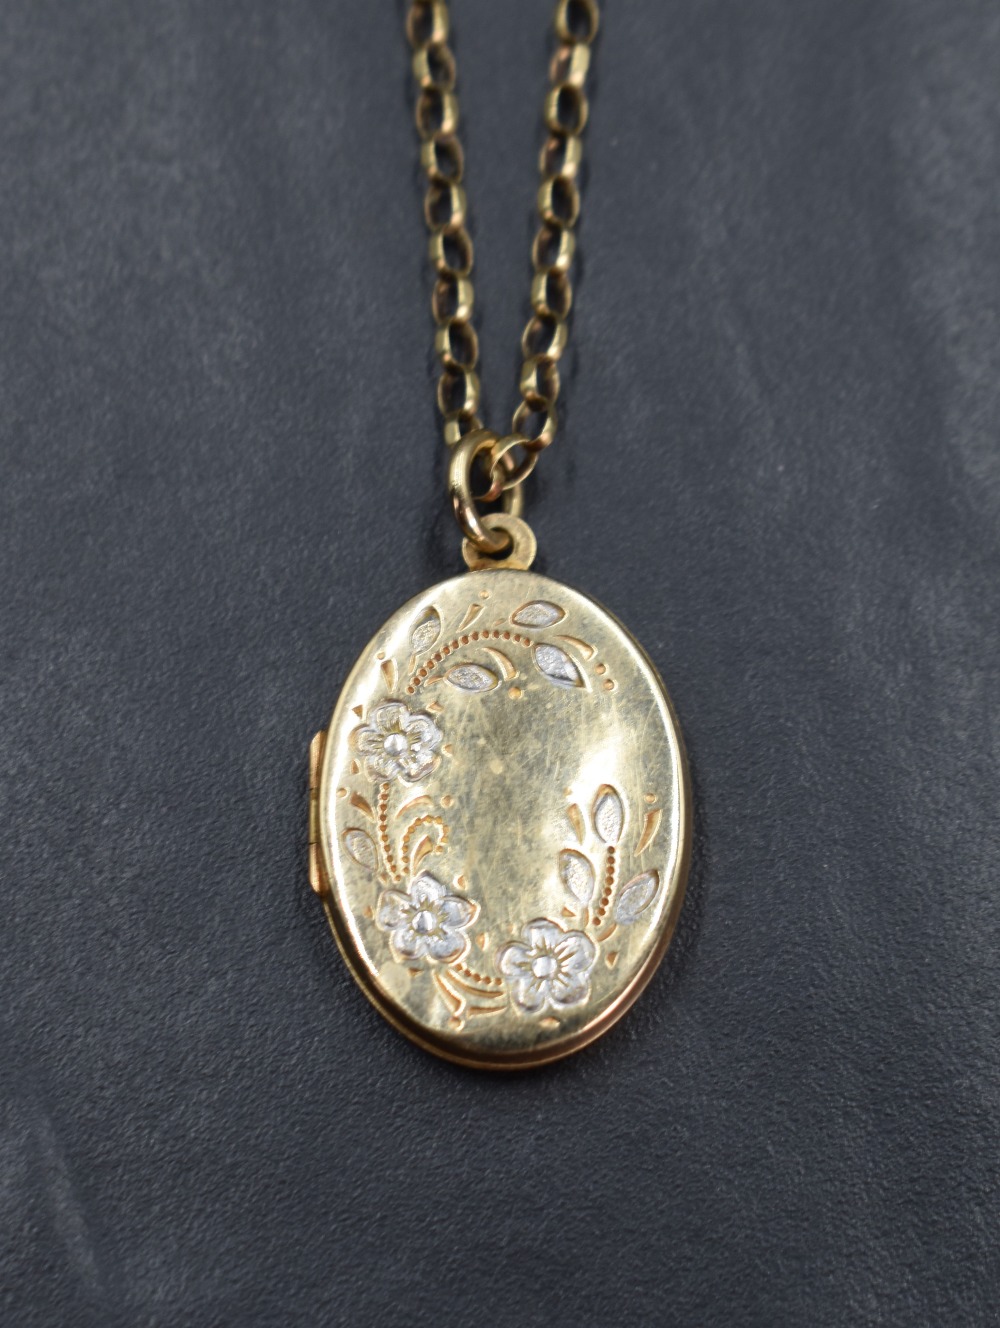 A yellow metal oval locket having a decorative floral design engraving on a 9ct gold rolo chain, 7.